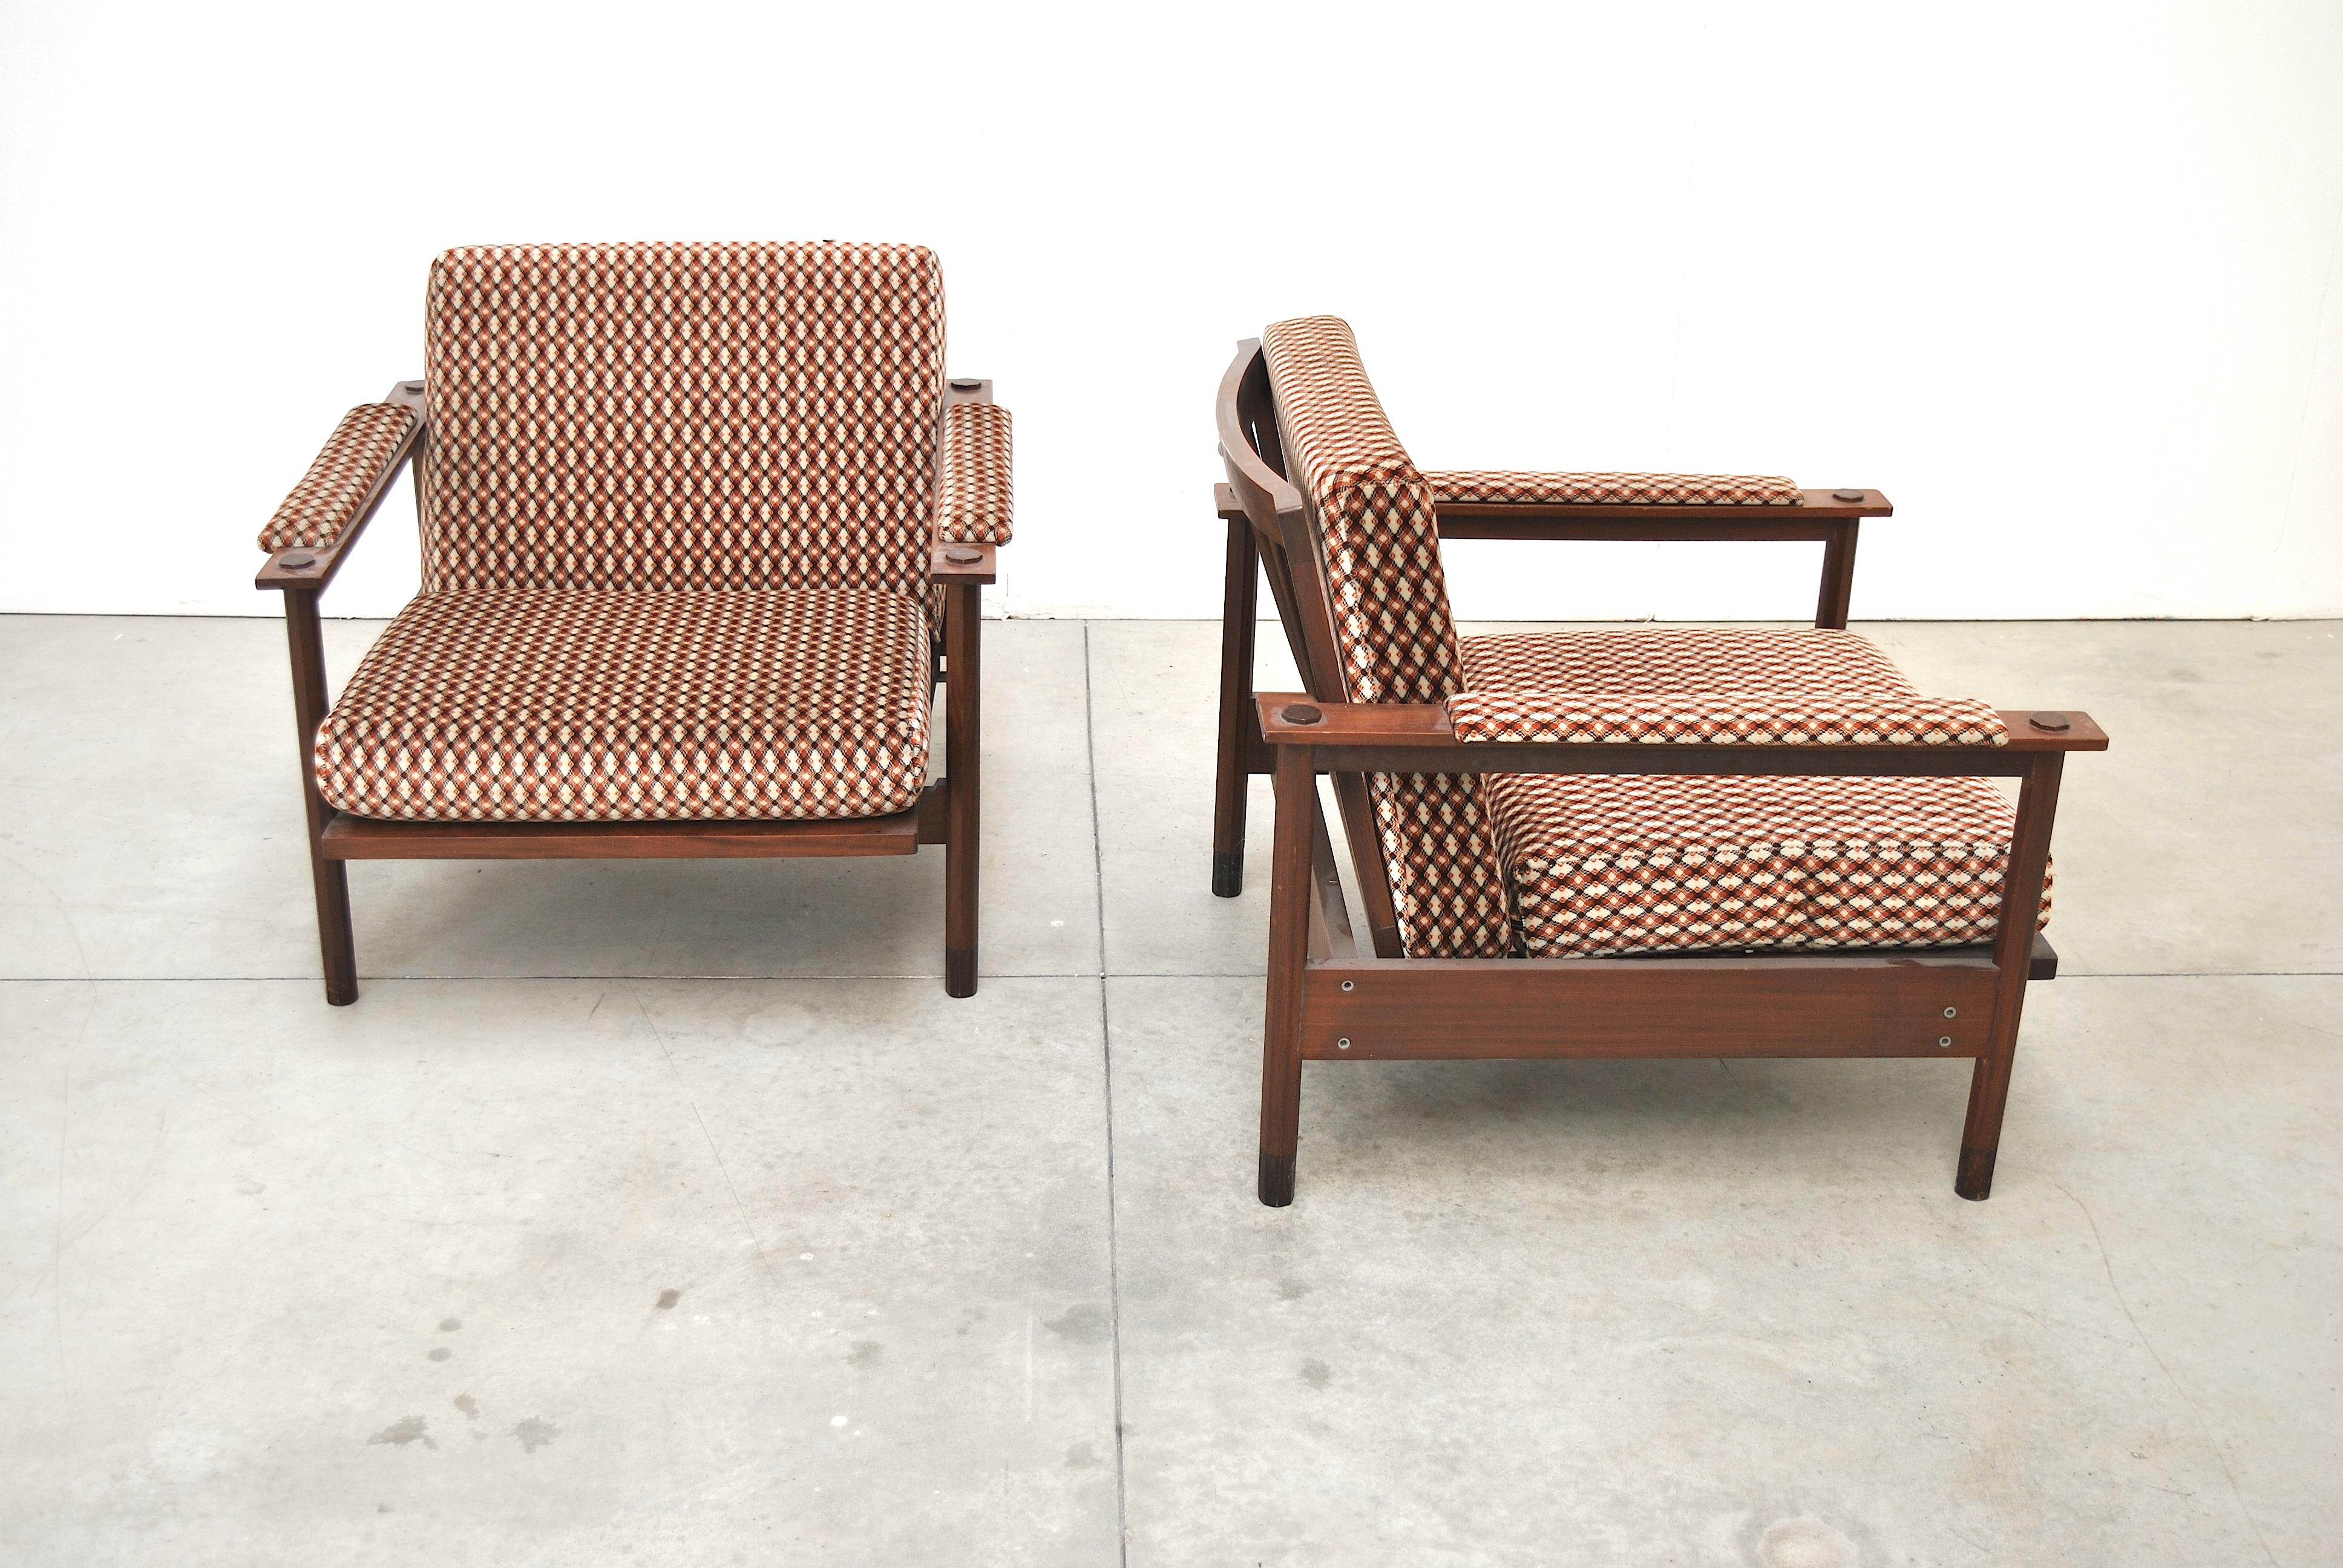 Pair of midcentury Italian armchairs in velvet and wood manufactured by Stildomus in the 1960s with reclining back and extendable seat.

These fabric on these chairs are customized. We have our own in-house upholstery studio that can expertly